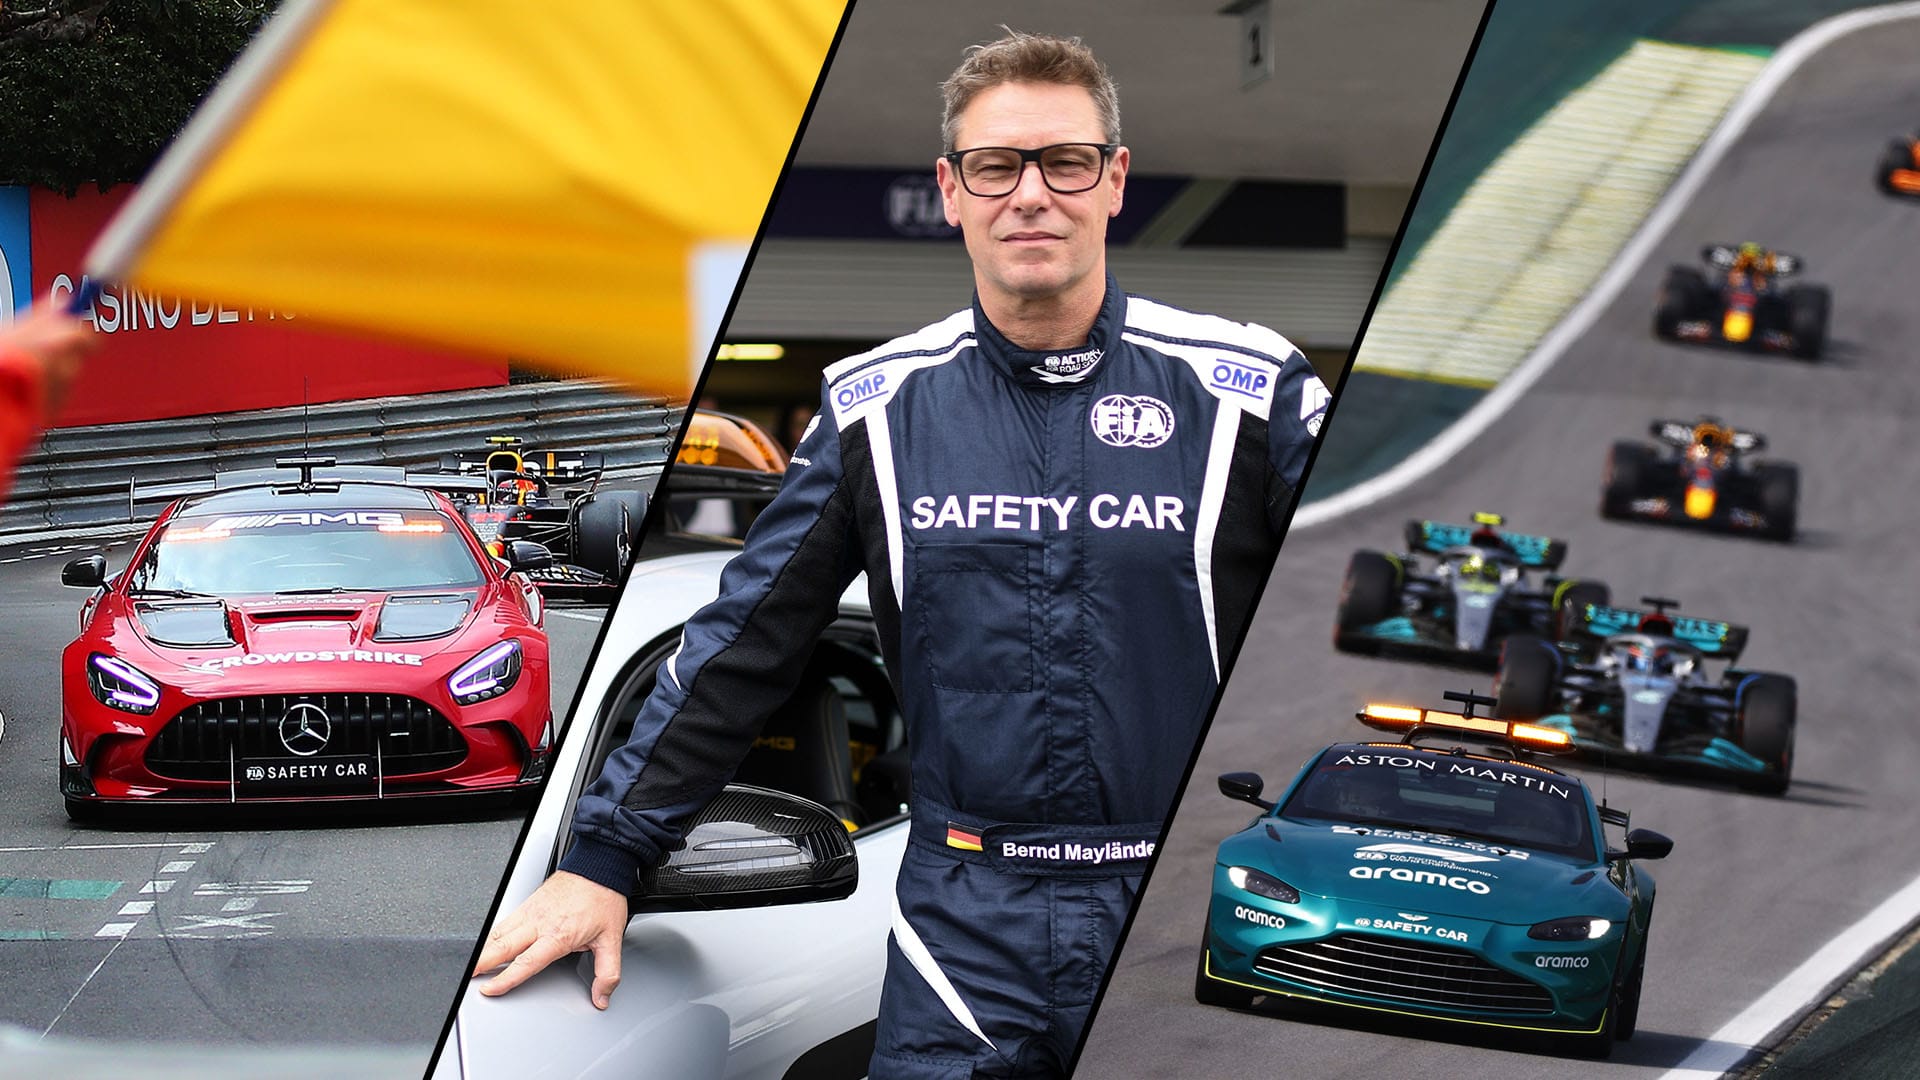 Laps Led F1 2022 Hundreds of laps led, chauffeuring Schumacher and feeling like James Bond –  Bernd Maylander on life as the FIA F1 Safety Car driver | Formula 1®